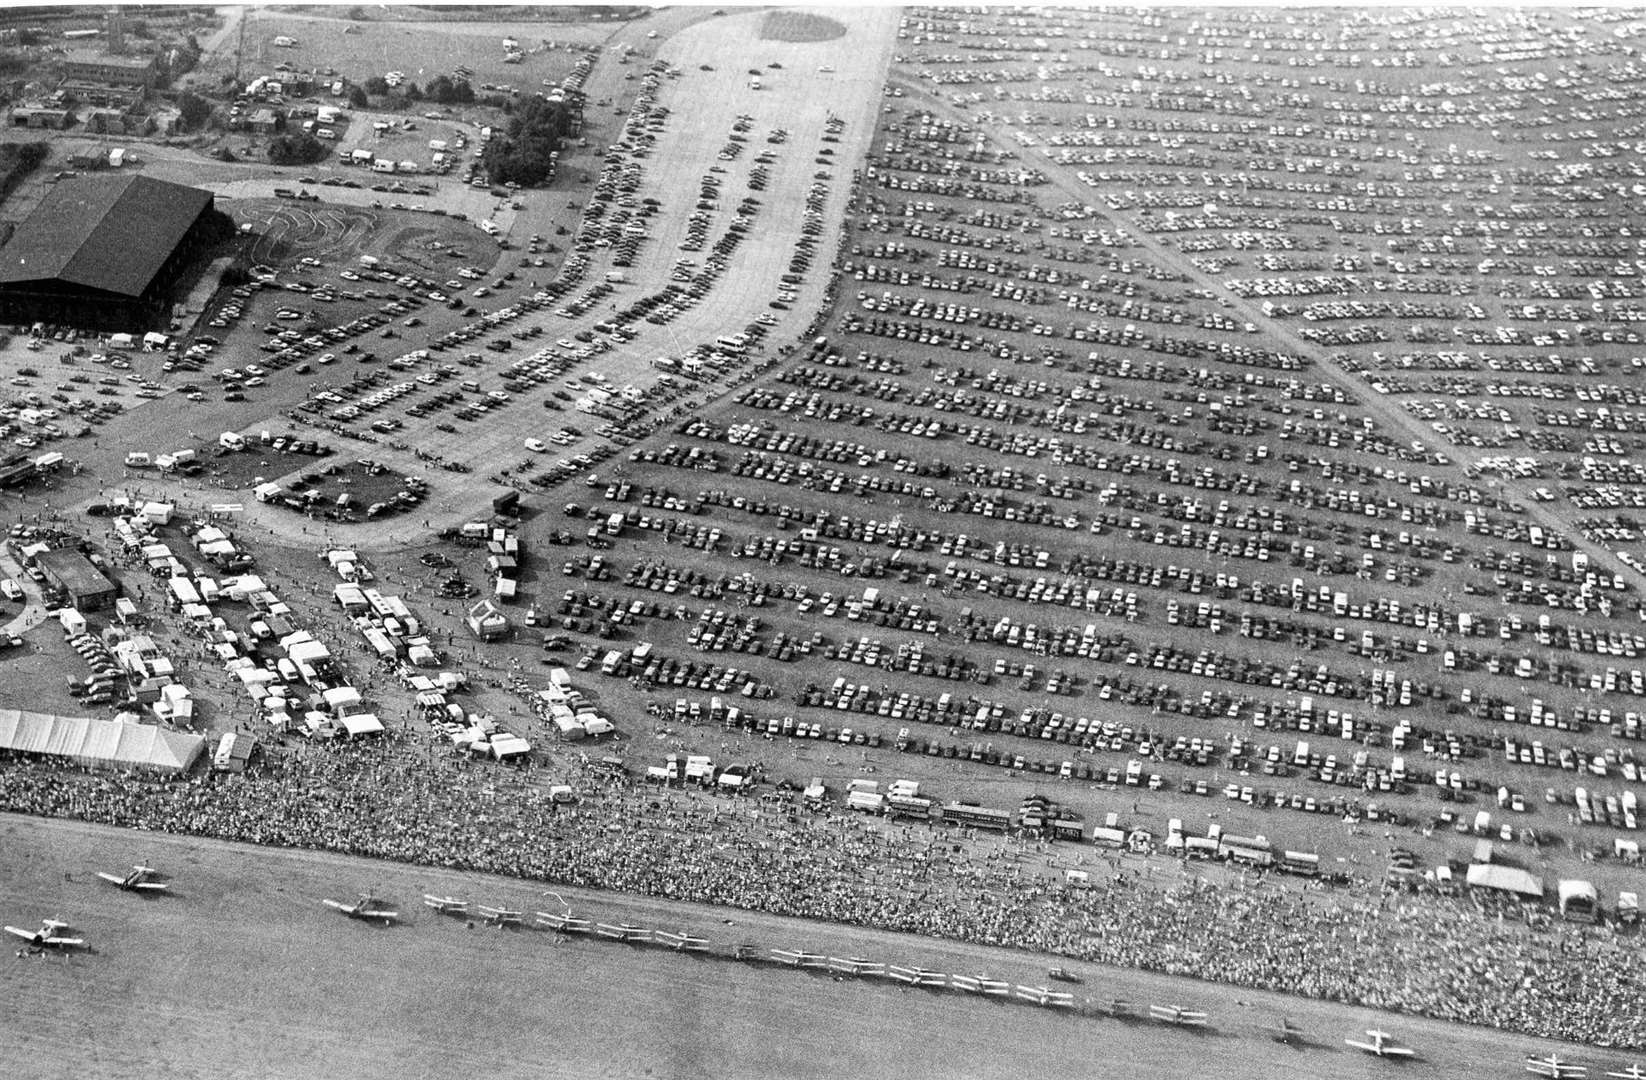 Great Warbirds air display, West Malling Airfield, Kent. An amazing aerial view of West Malling airfield, packed with spectators and their cars. August, 1990